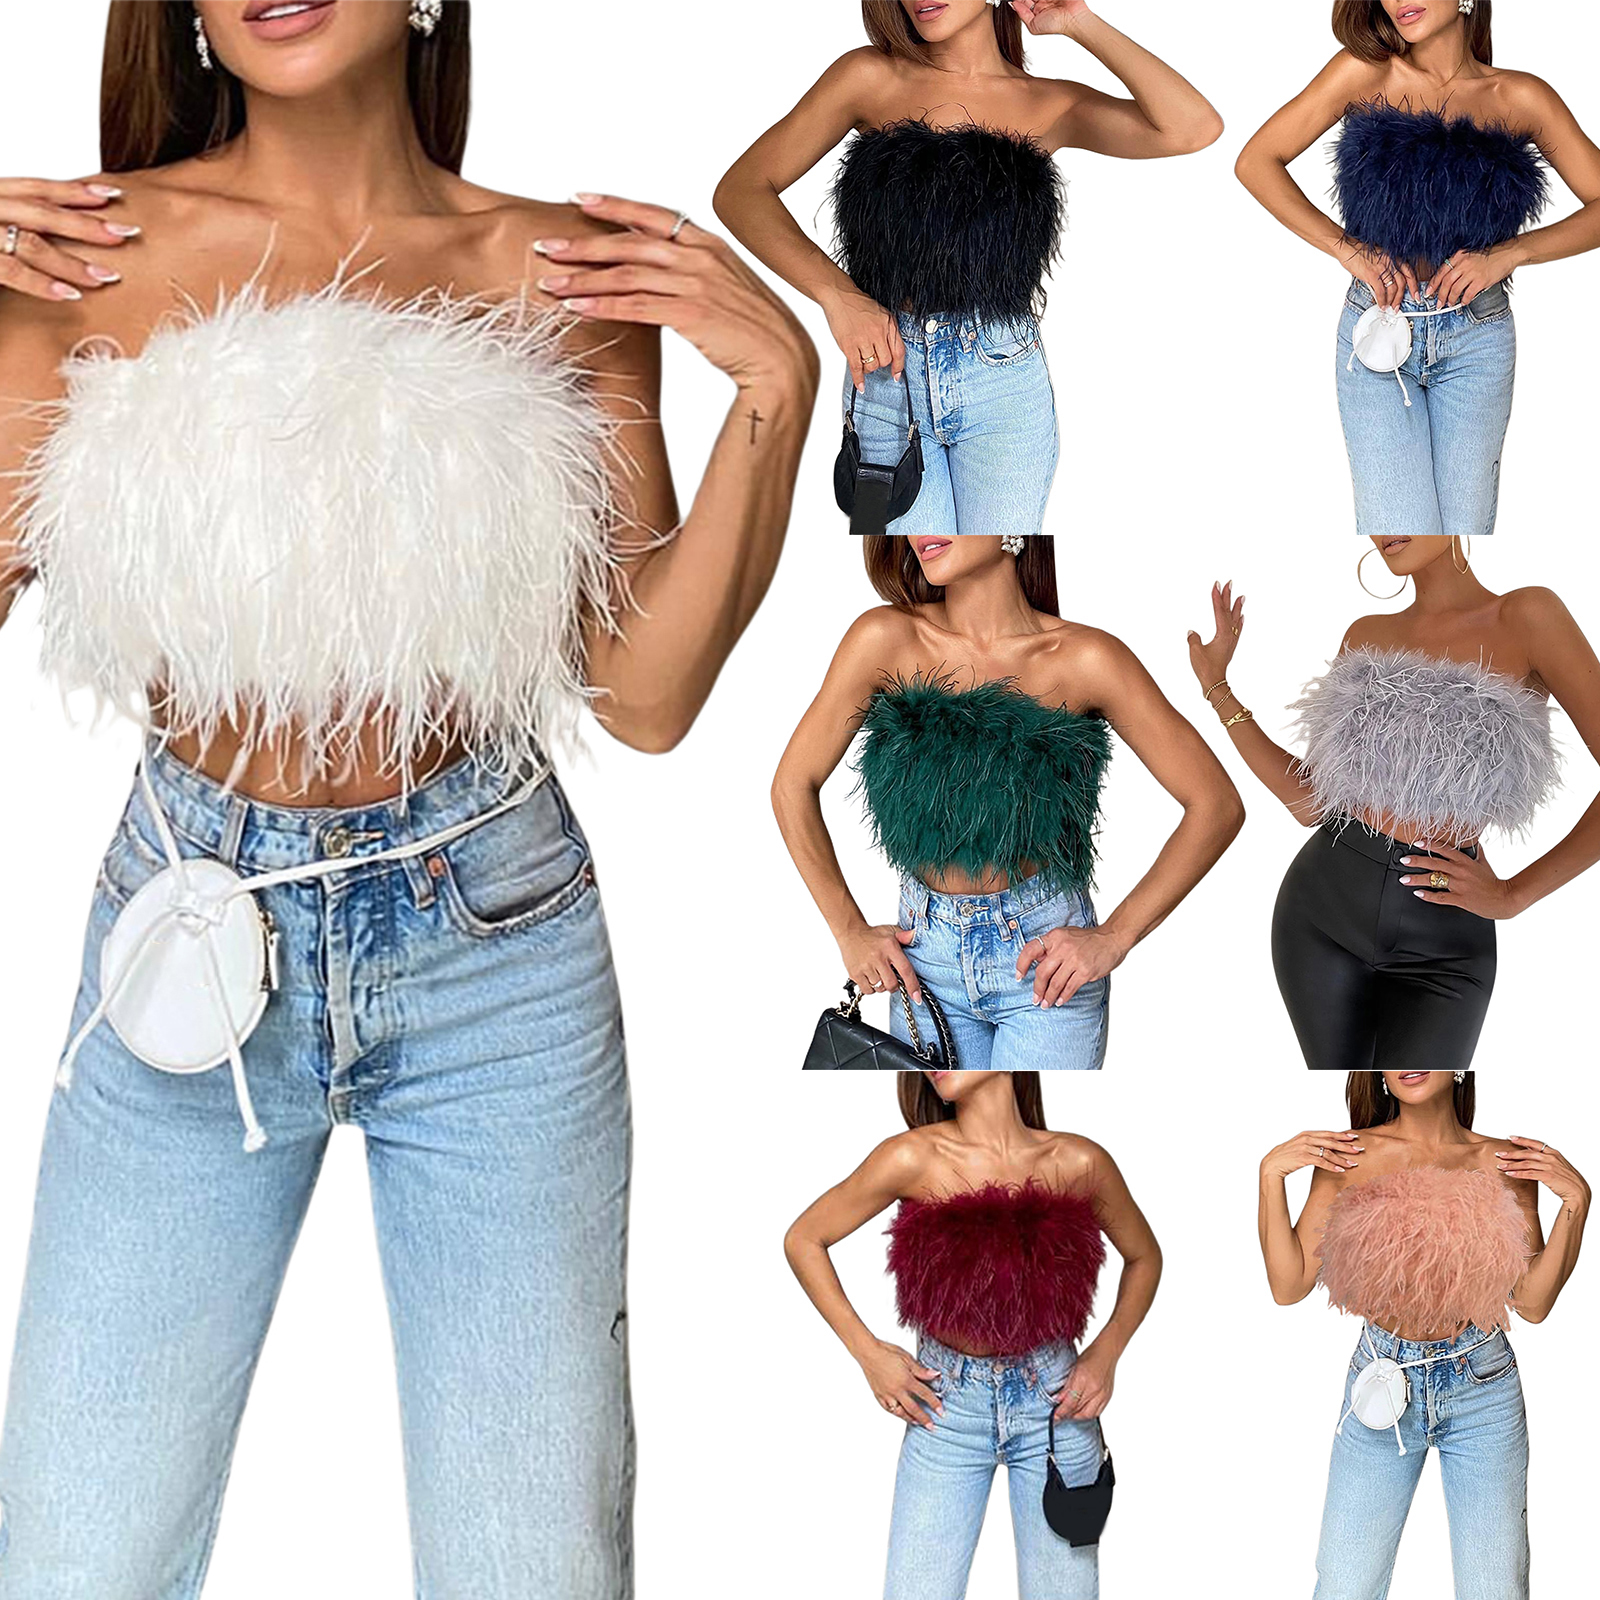 BackTrack — LV Tube Top with Fur Jacket ( Early Access 